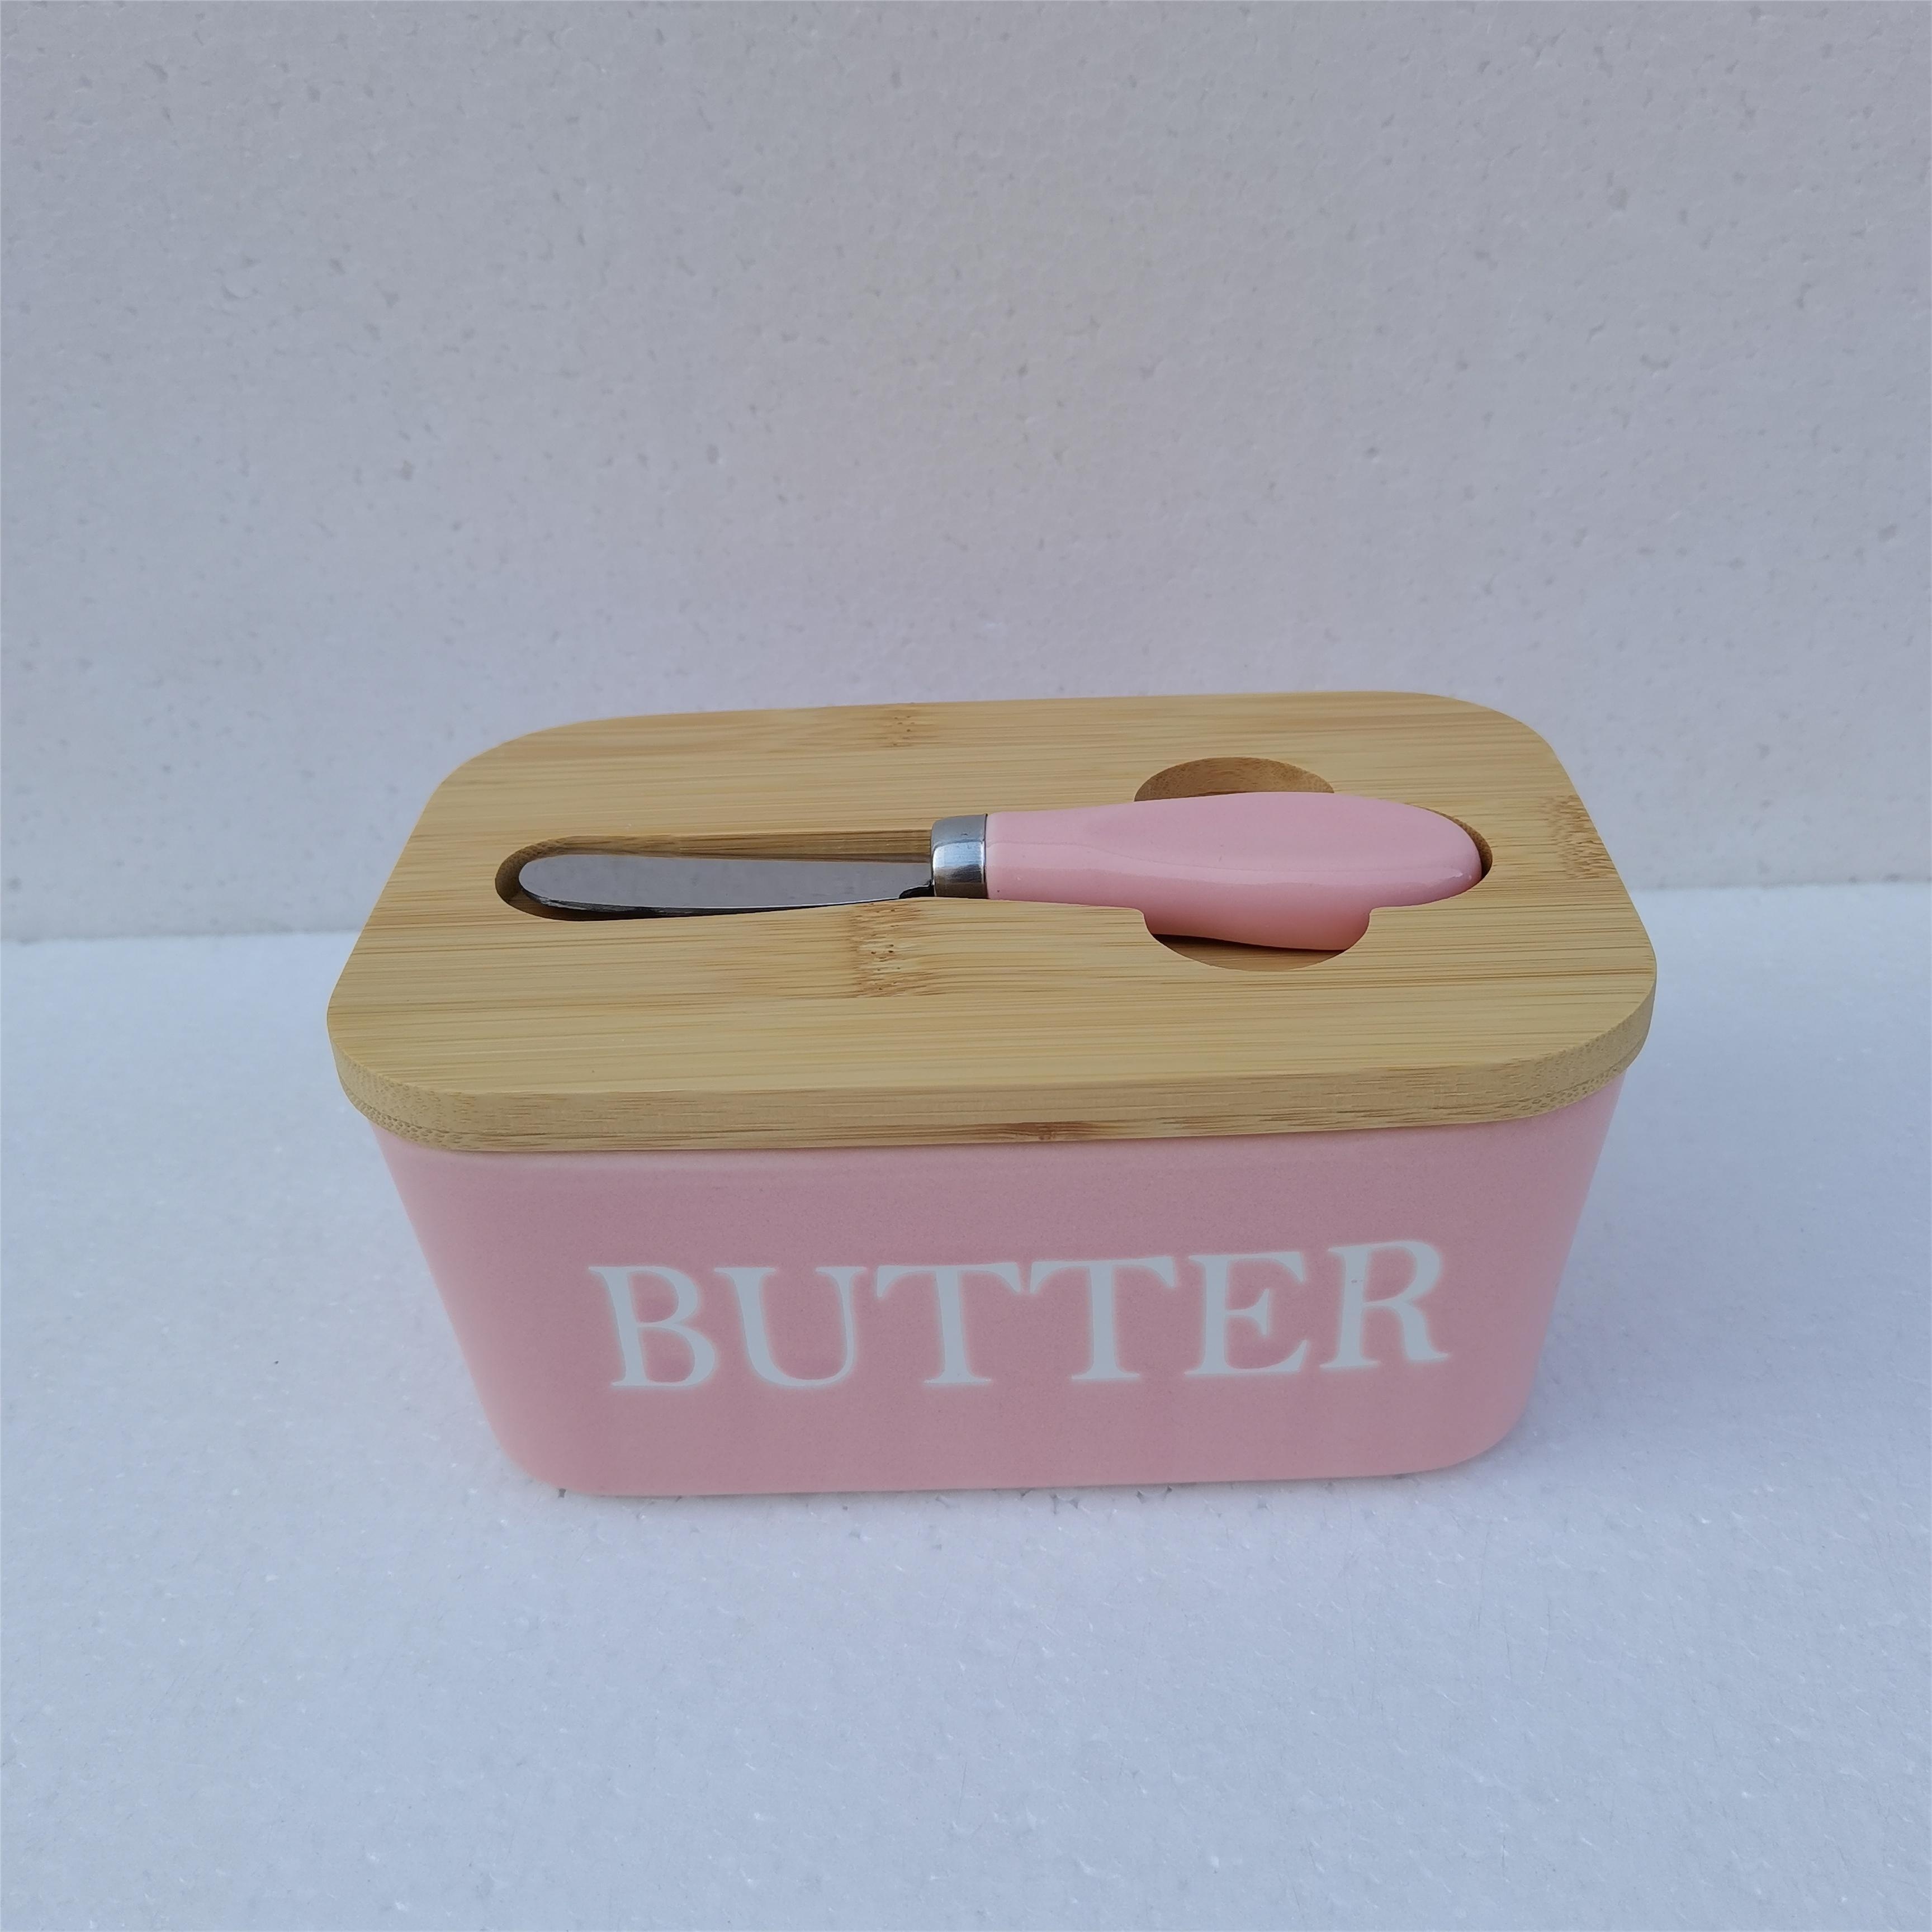 1set Butter Dish with Lid and Knife, Plastic Butter Keeper